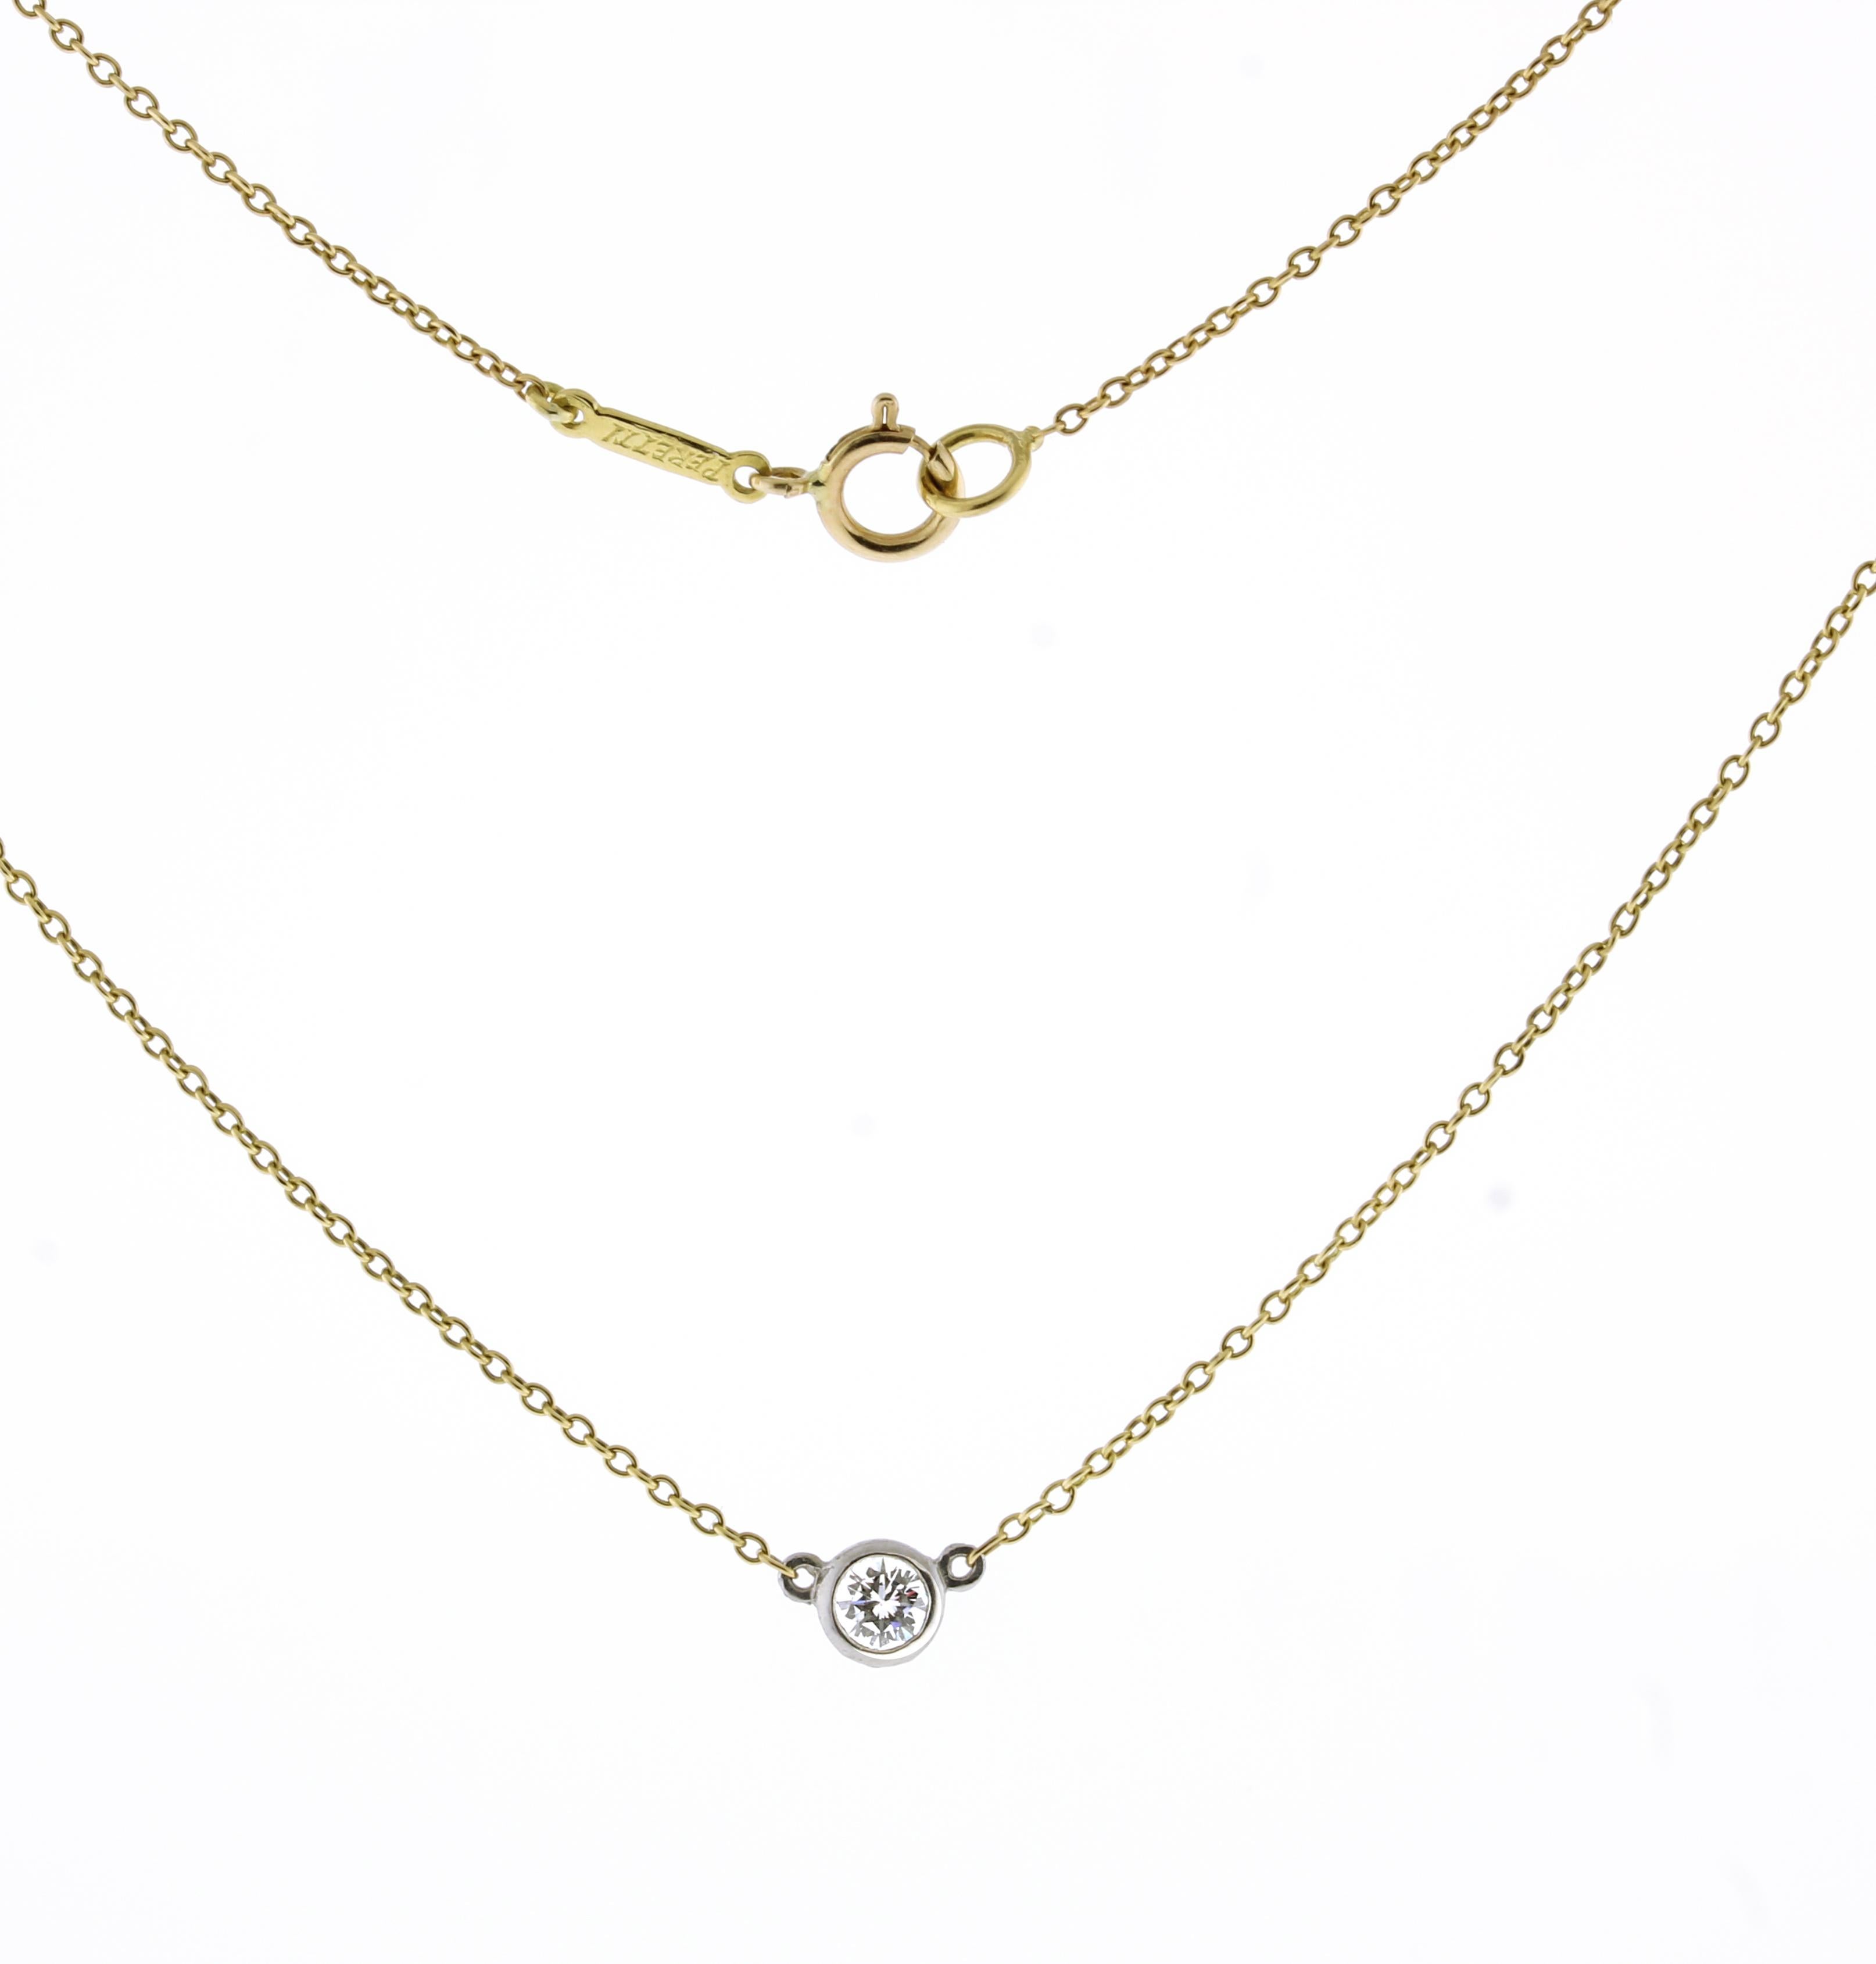 From Tiffany & Co's acclaimed designer Elsa Peretti diamond by the yard collection and diamond pendent.
Designer: Tiffany & Co.
♦ Metal: 18 Karat gold, platinum bezel
♦ Diamond=..14 carats G-H color, VS clarity, 
♦ Circa 1999
♦ 16 inch necklace
♦